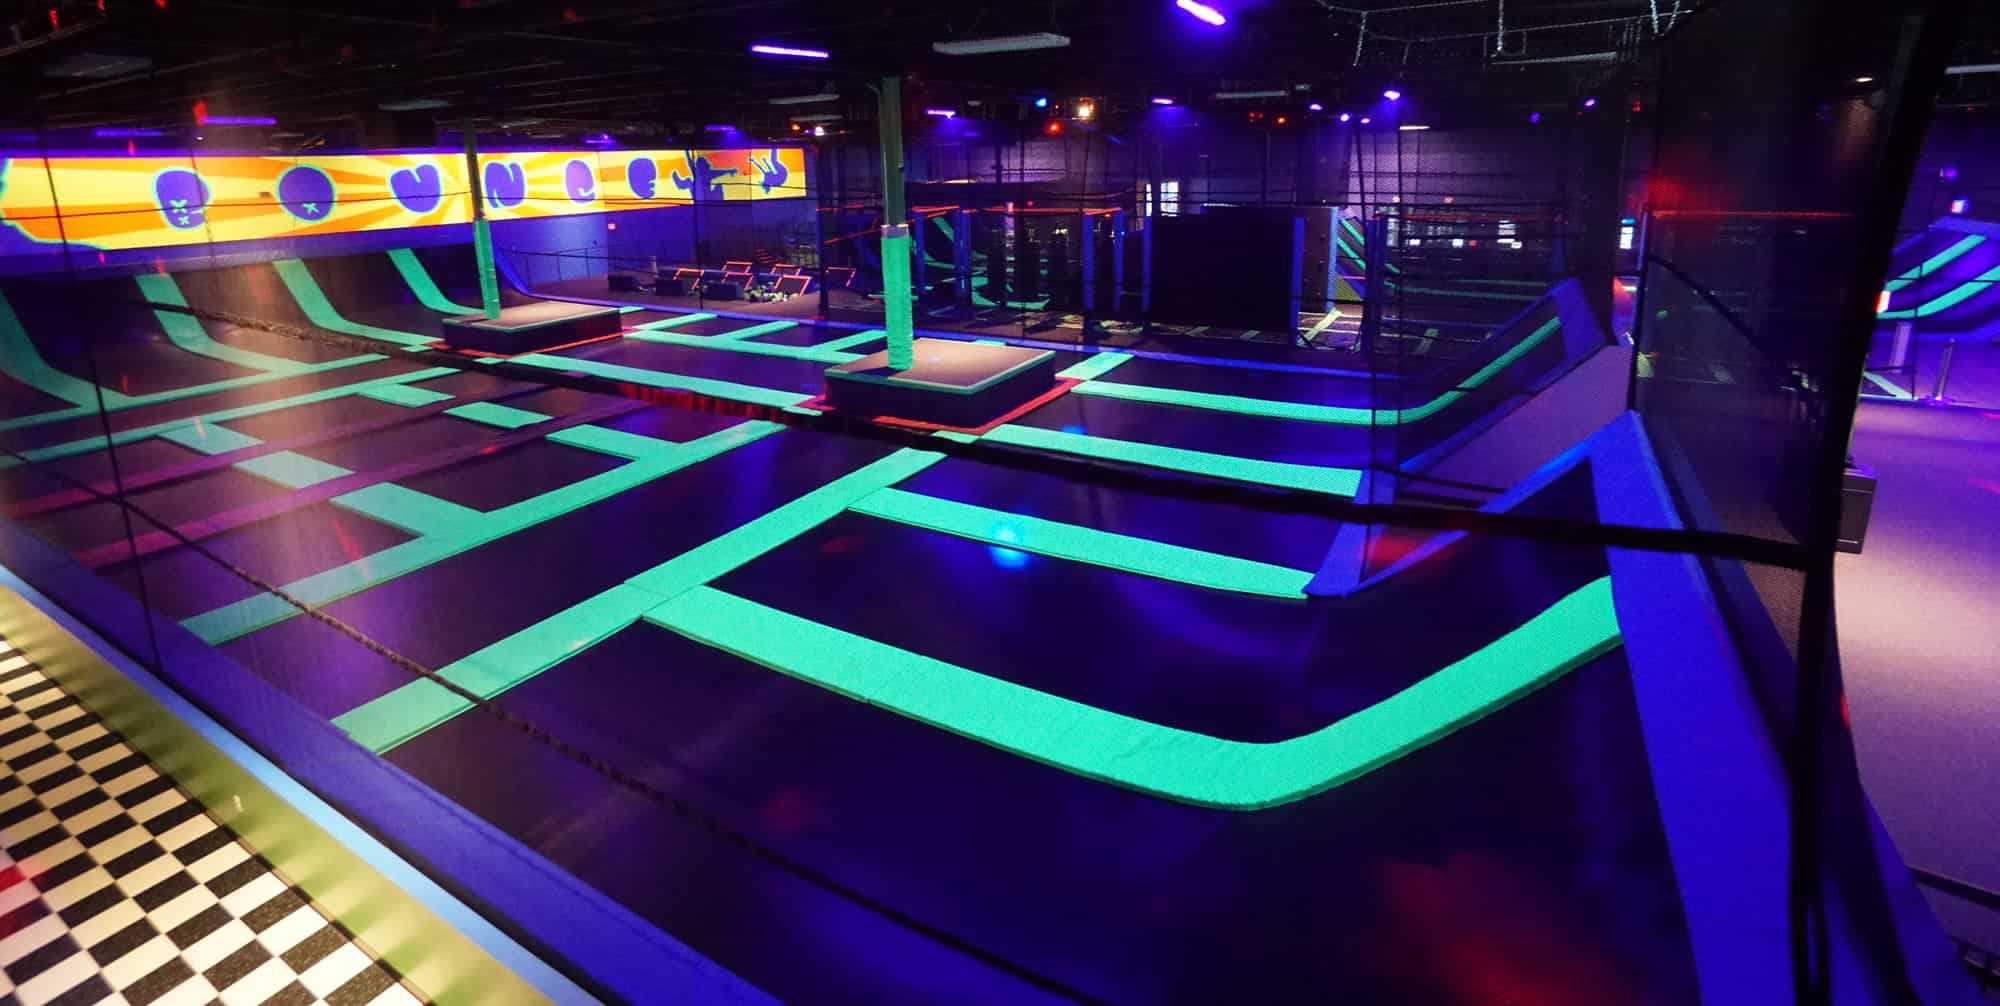 SYMETRIX AND TRAMPOLINES A WINNING COMBINATION